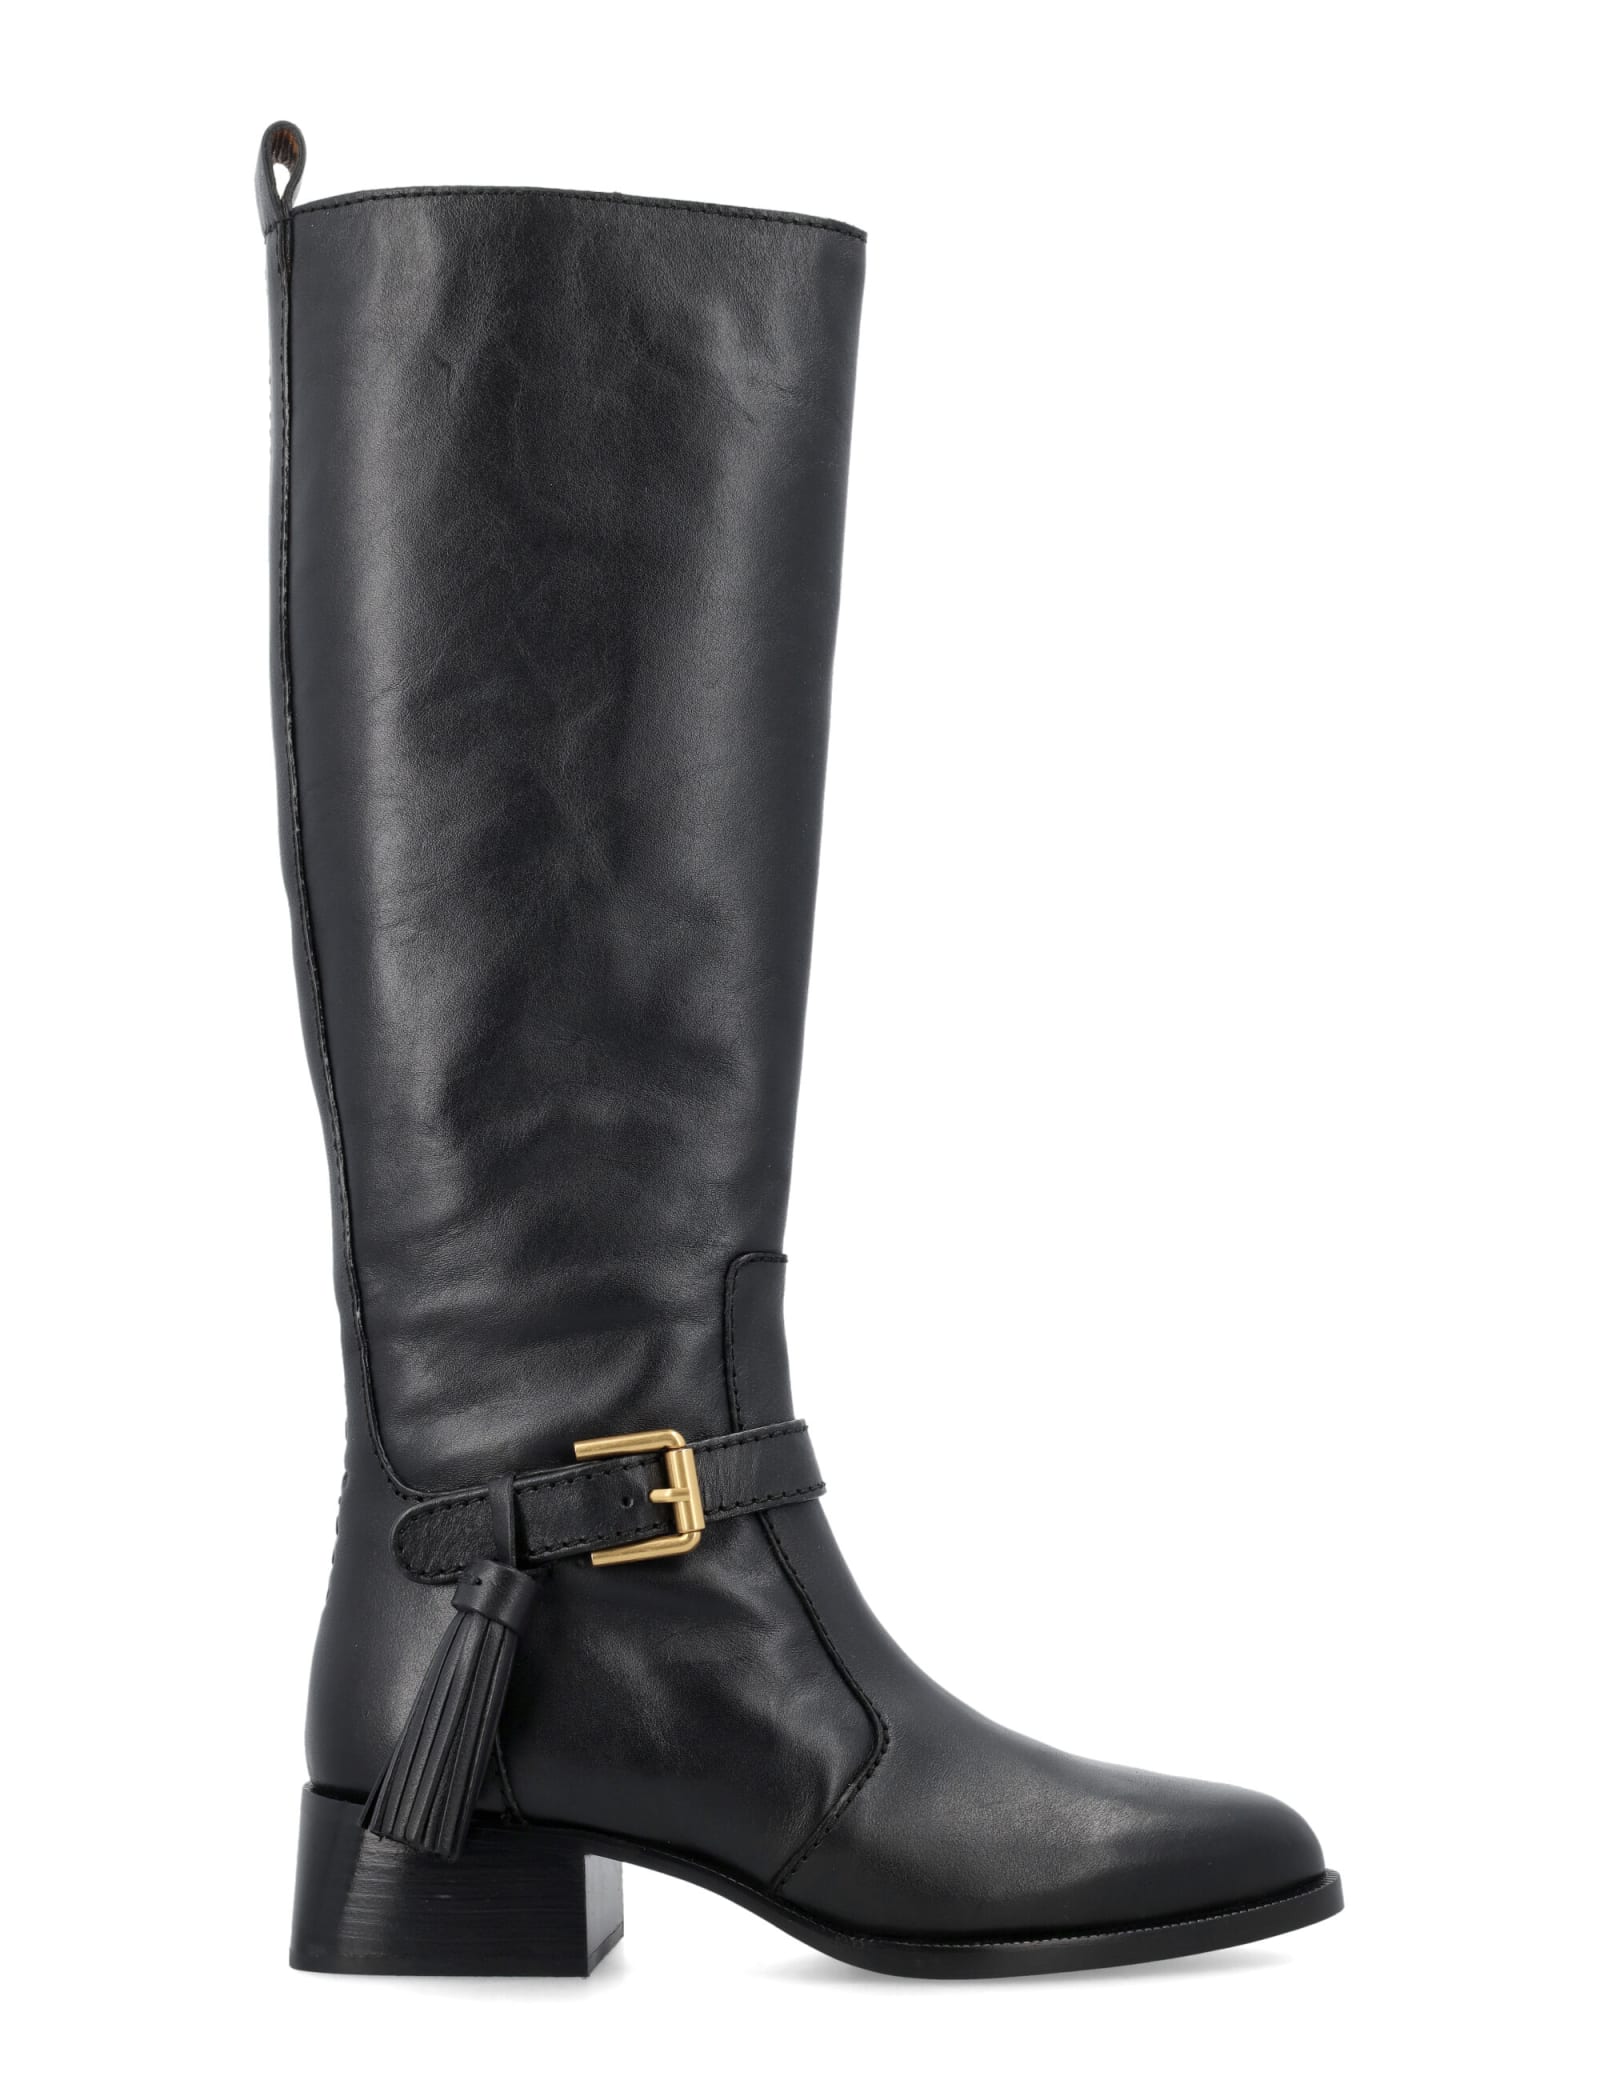 See by Chloé Lory Tassel Boots